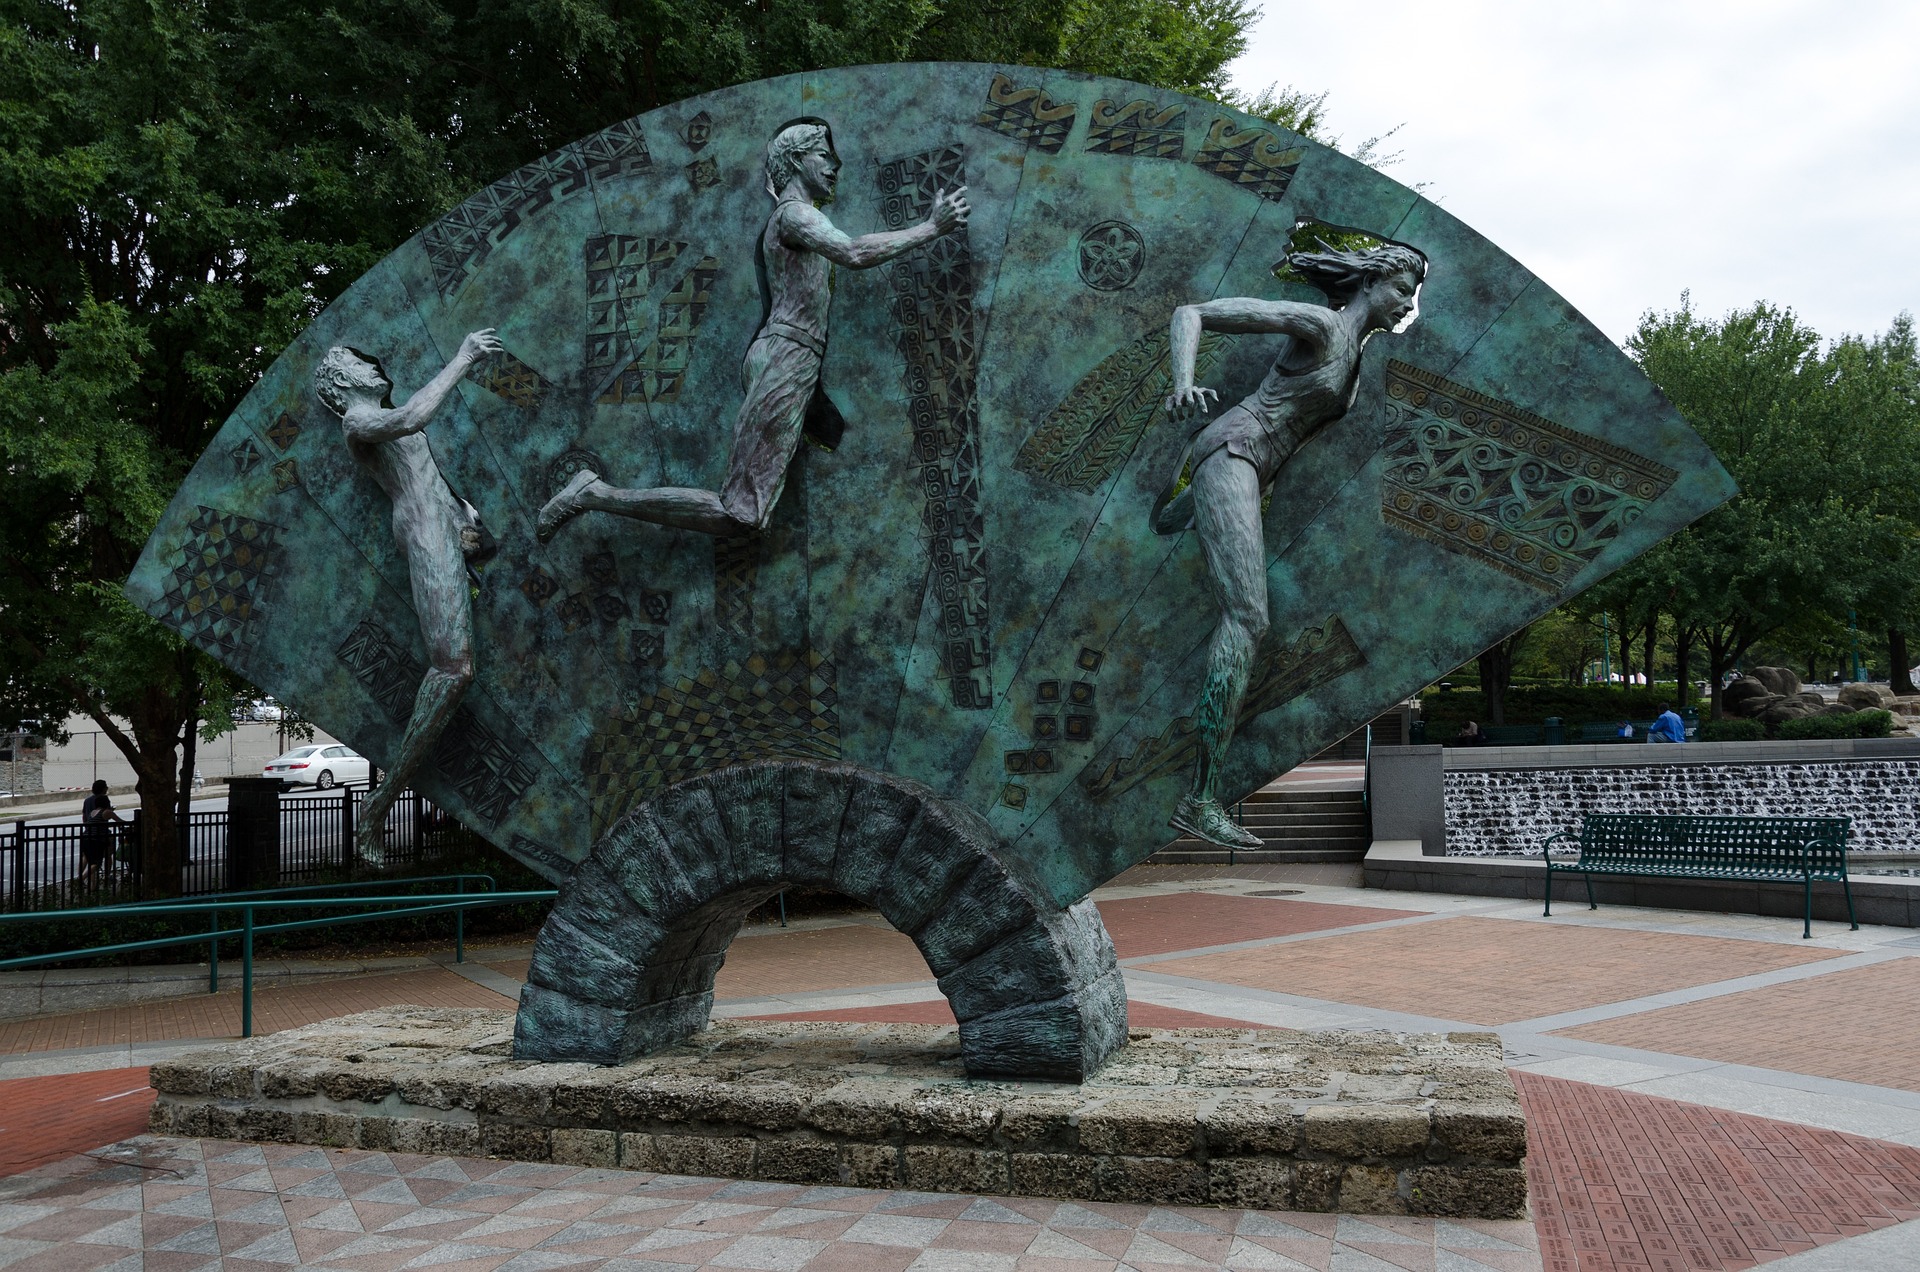 A sculpture located at Centennial Olympic Park